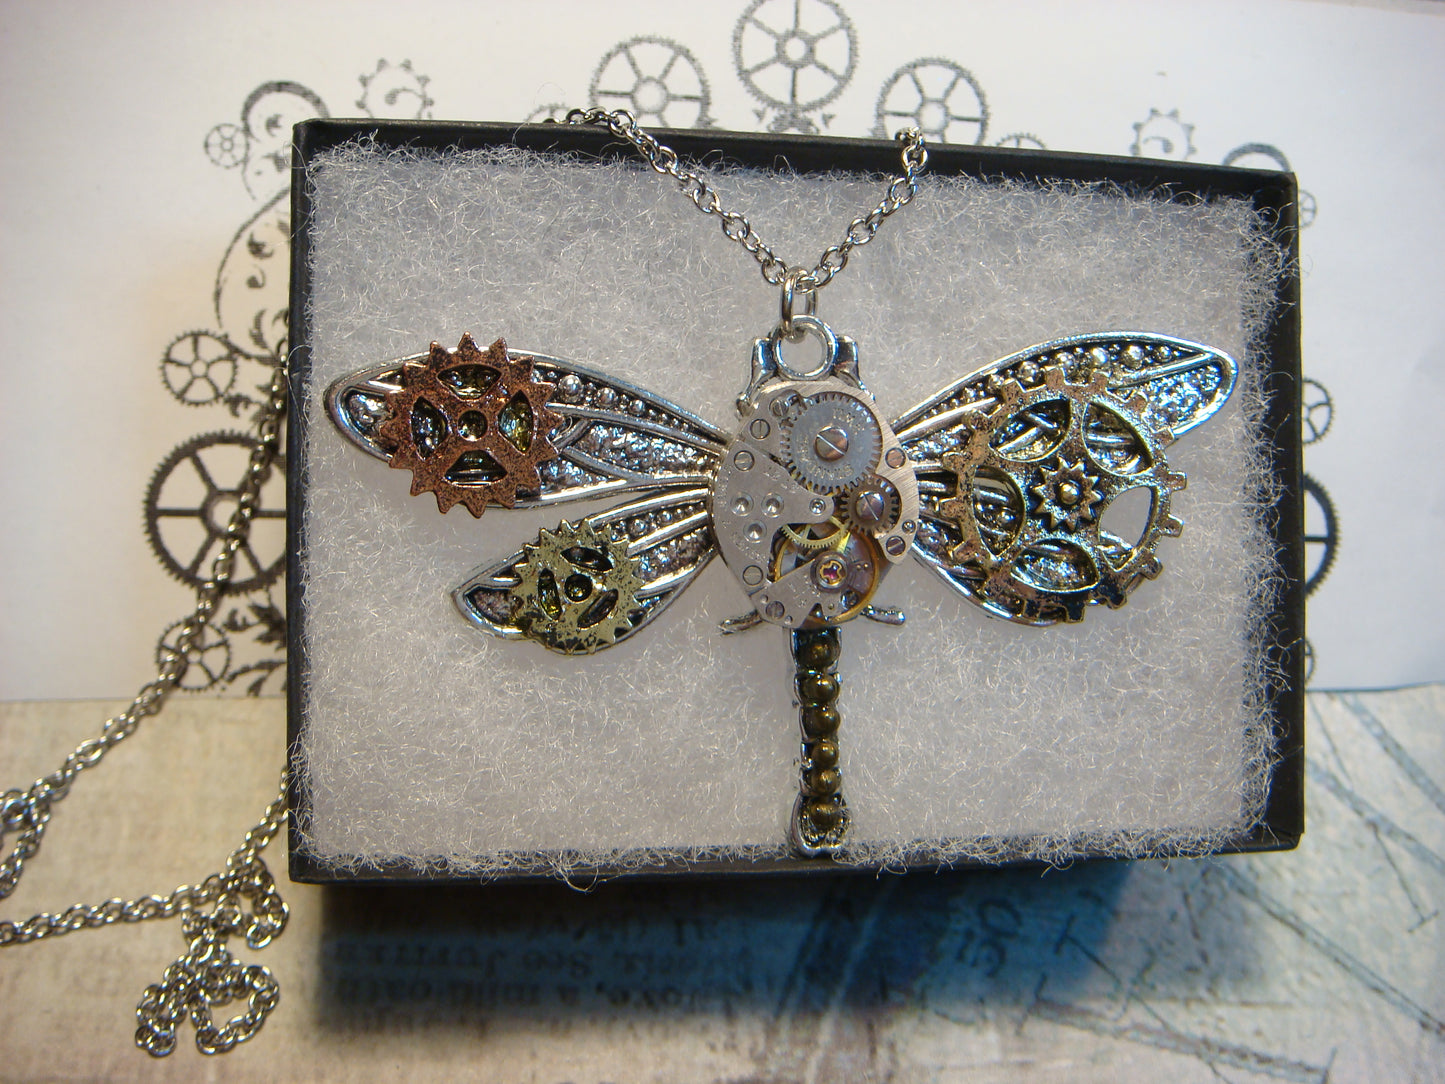 Steampunk Dragonfly Watch Movement Necklace with Exposed Gears